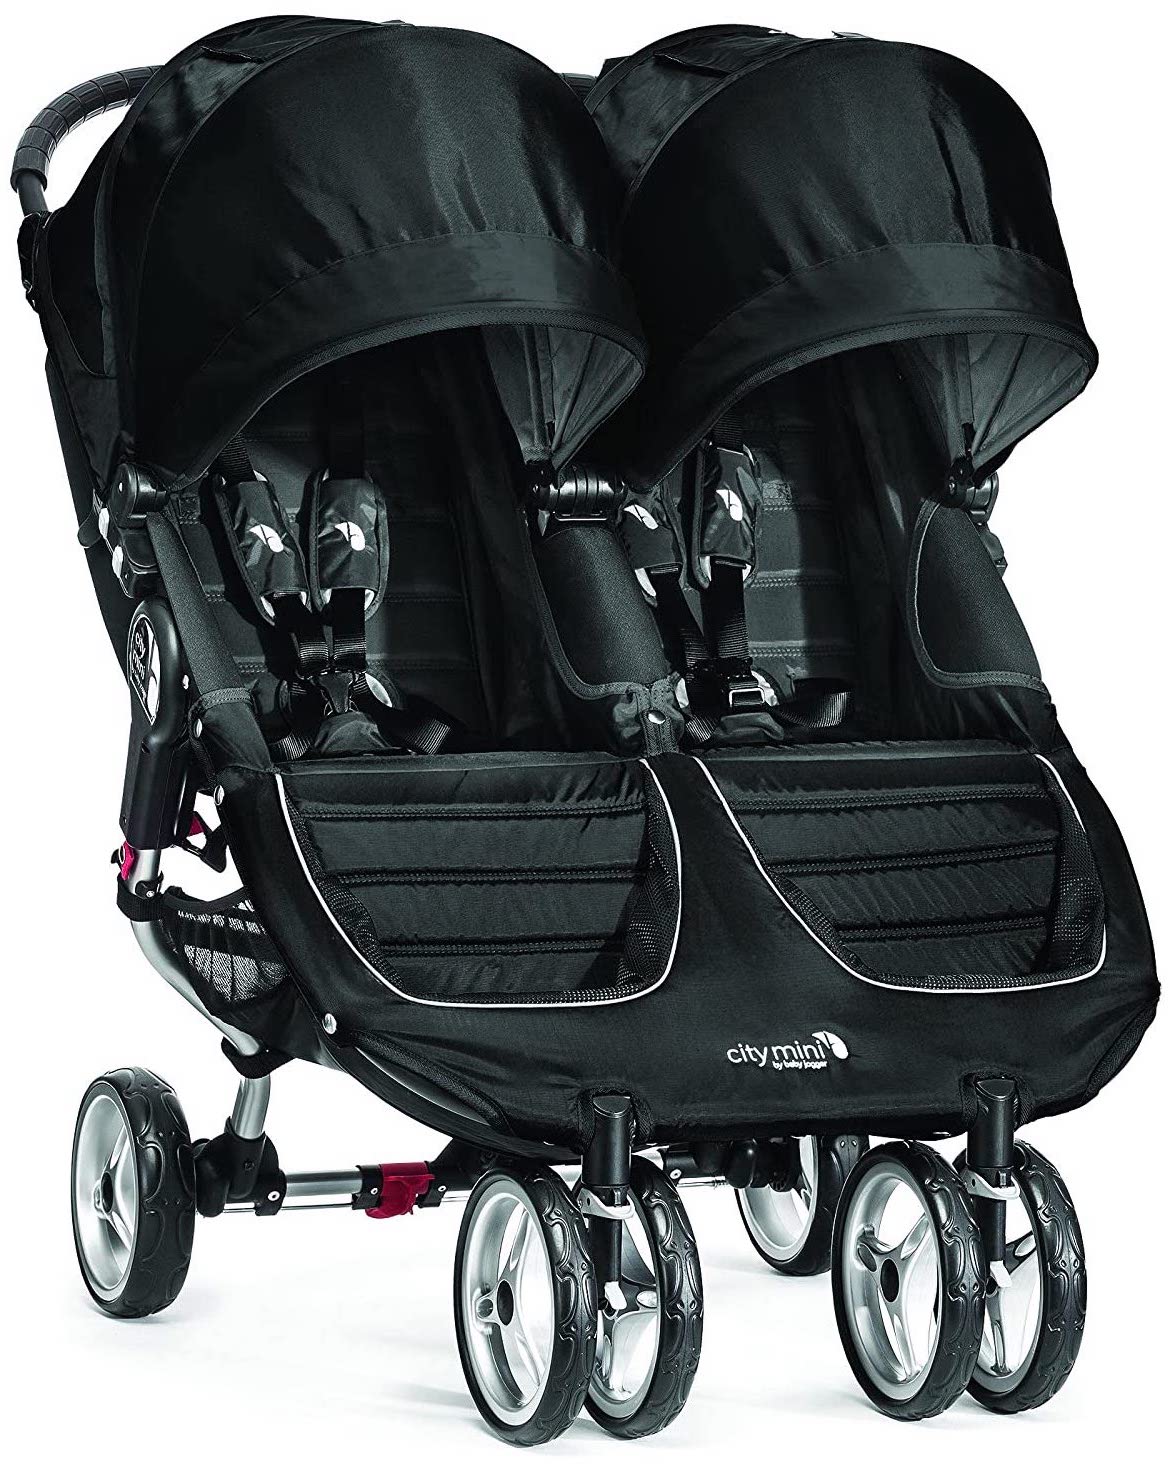 WDW Stroller Rental - Double Stroller Rental By Gold Mobility Scooters – The Mobility 2.0 LLC.